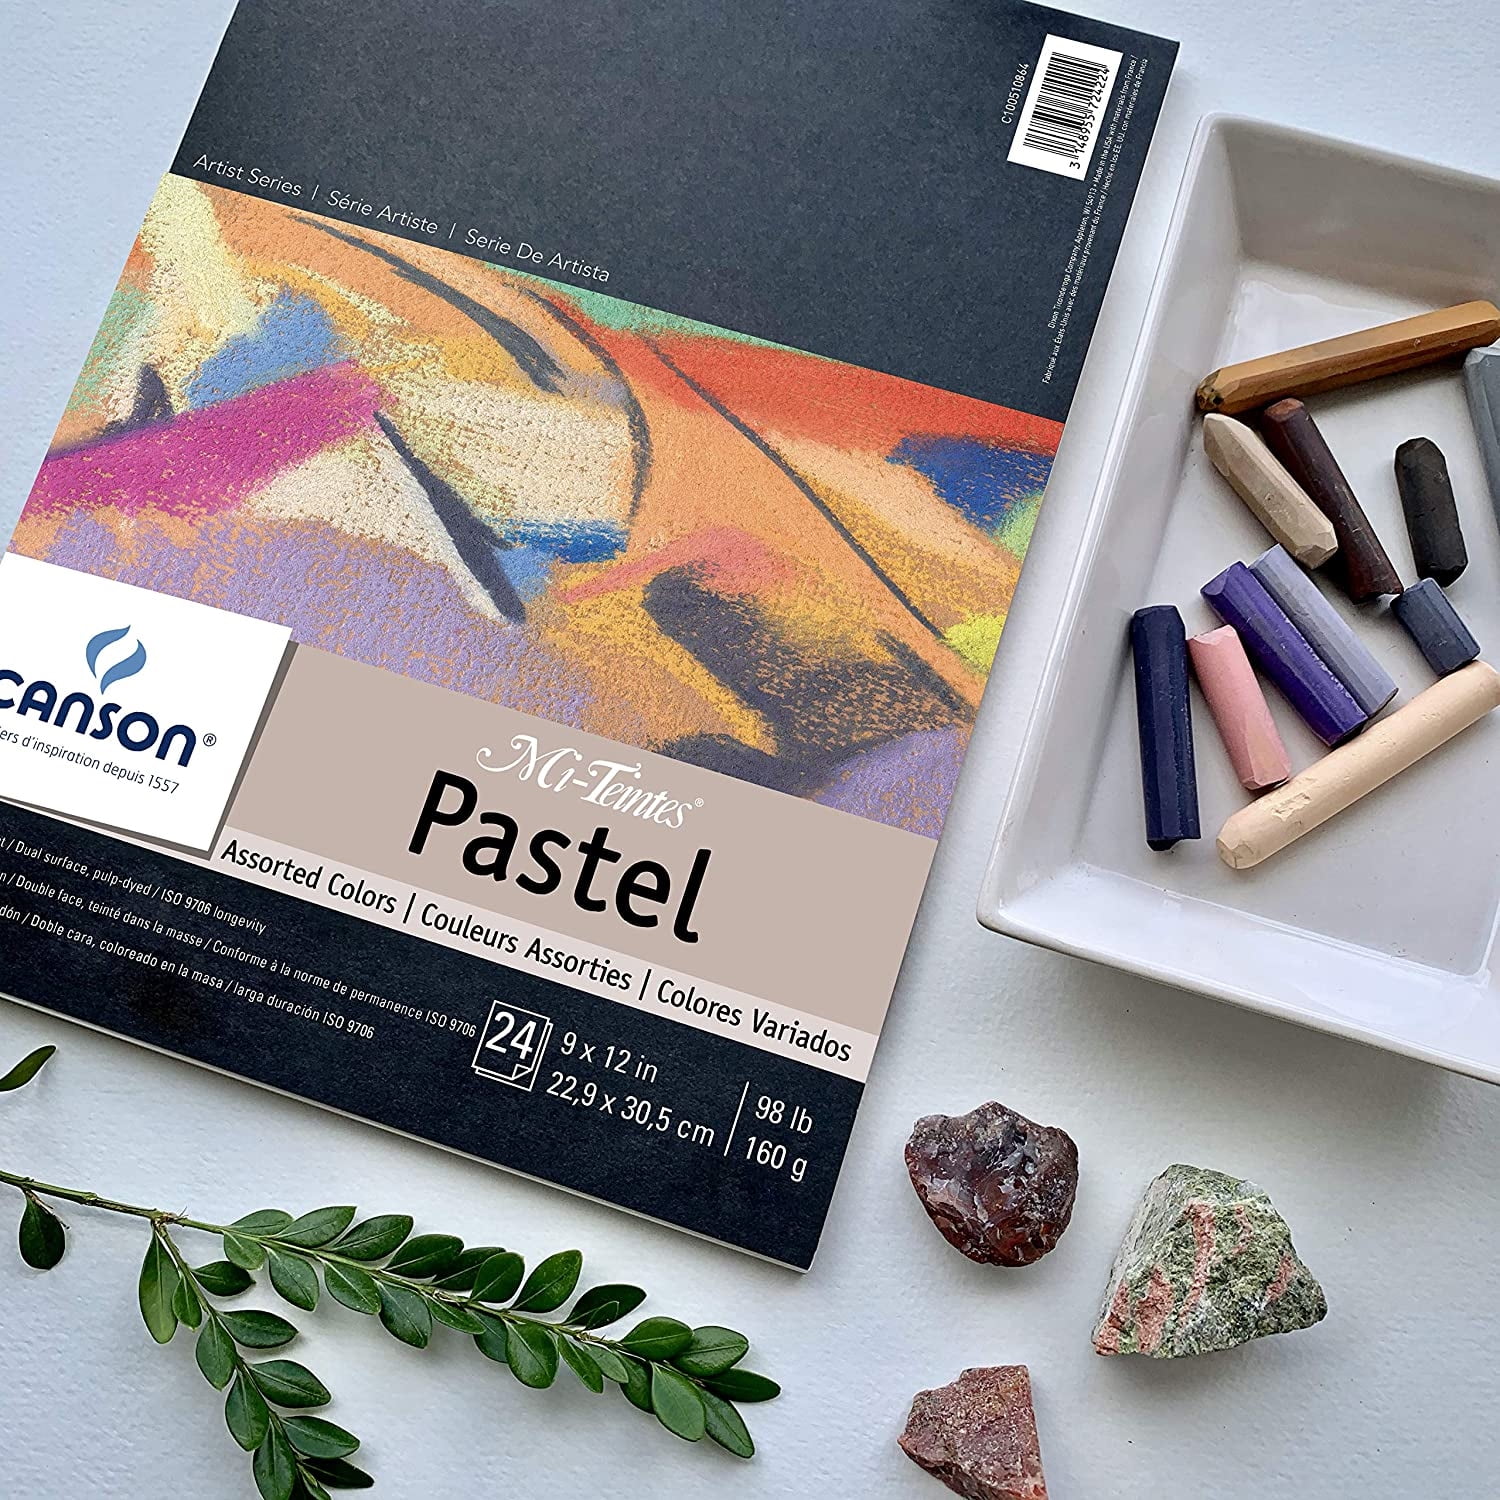 Canson Mi Tientes Pastel Paper, 24 Sheets, 9” x 12”, Assorted Tones - The  Art Store/Commercial Art Supply